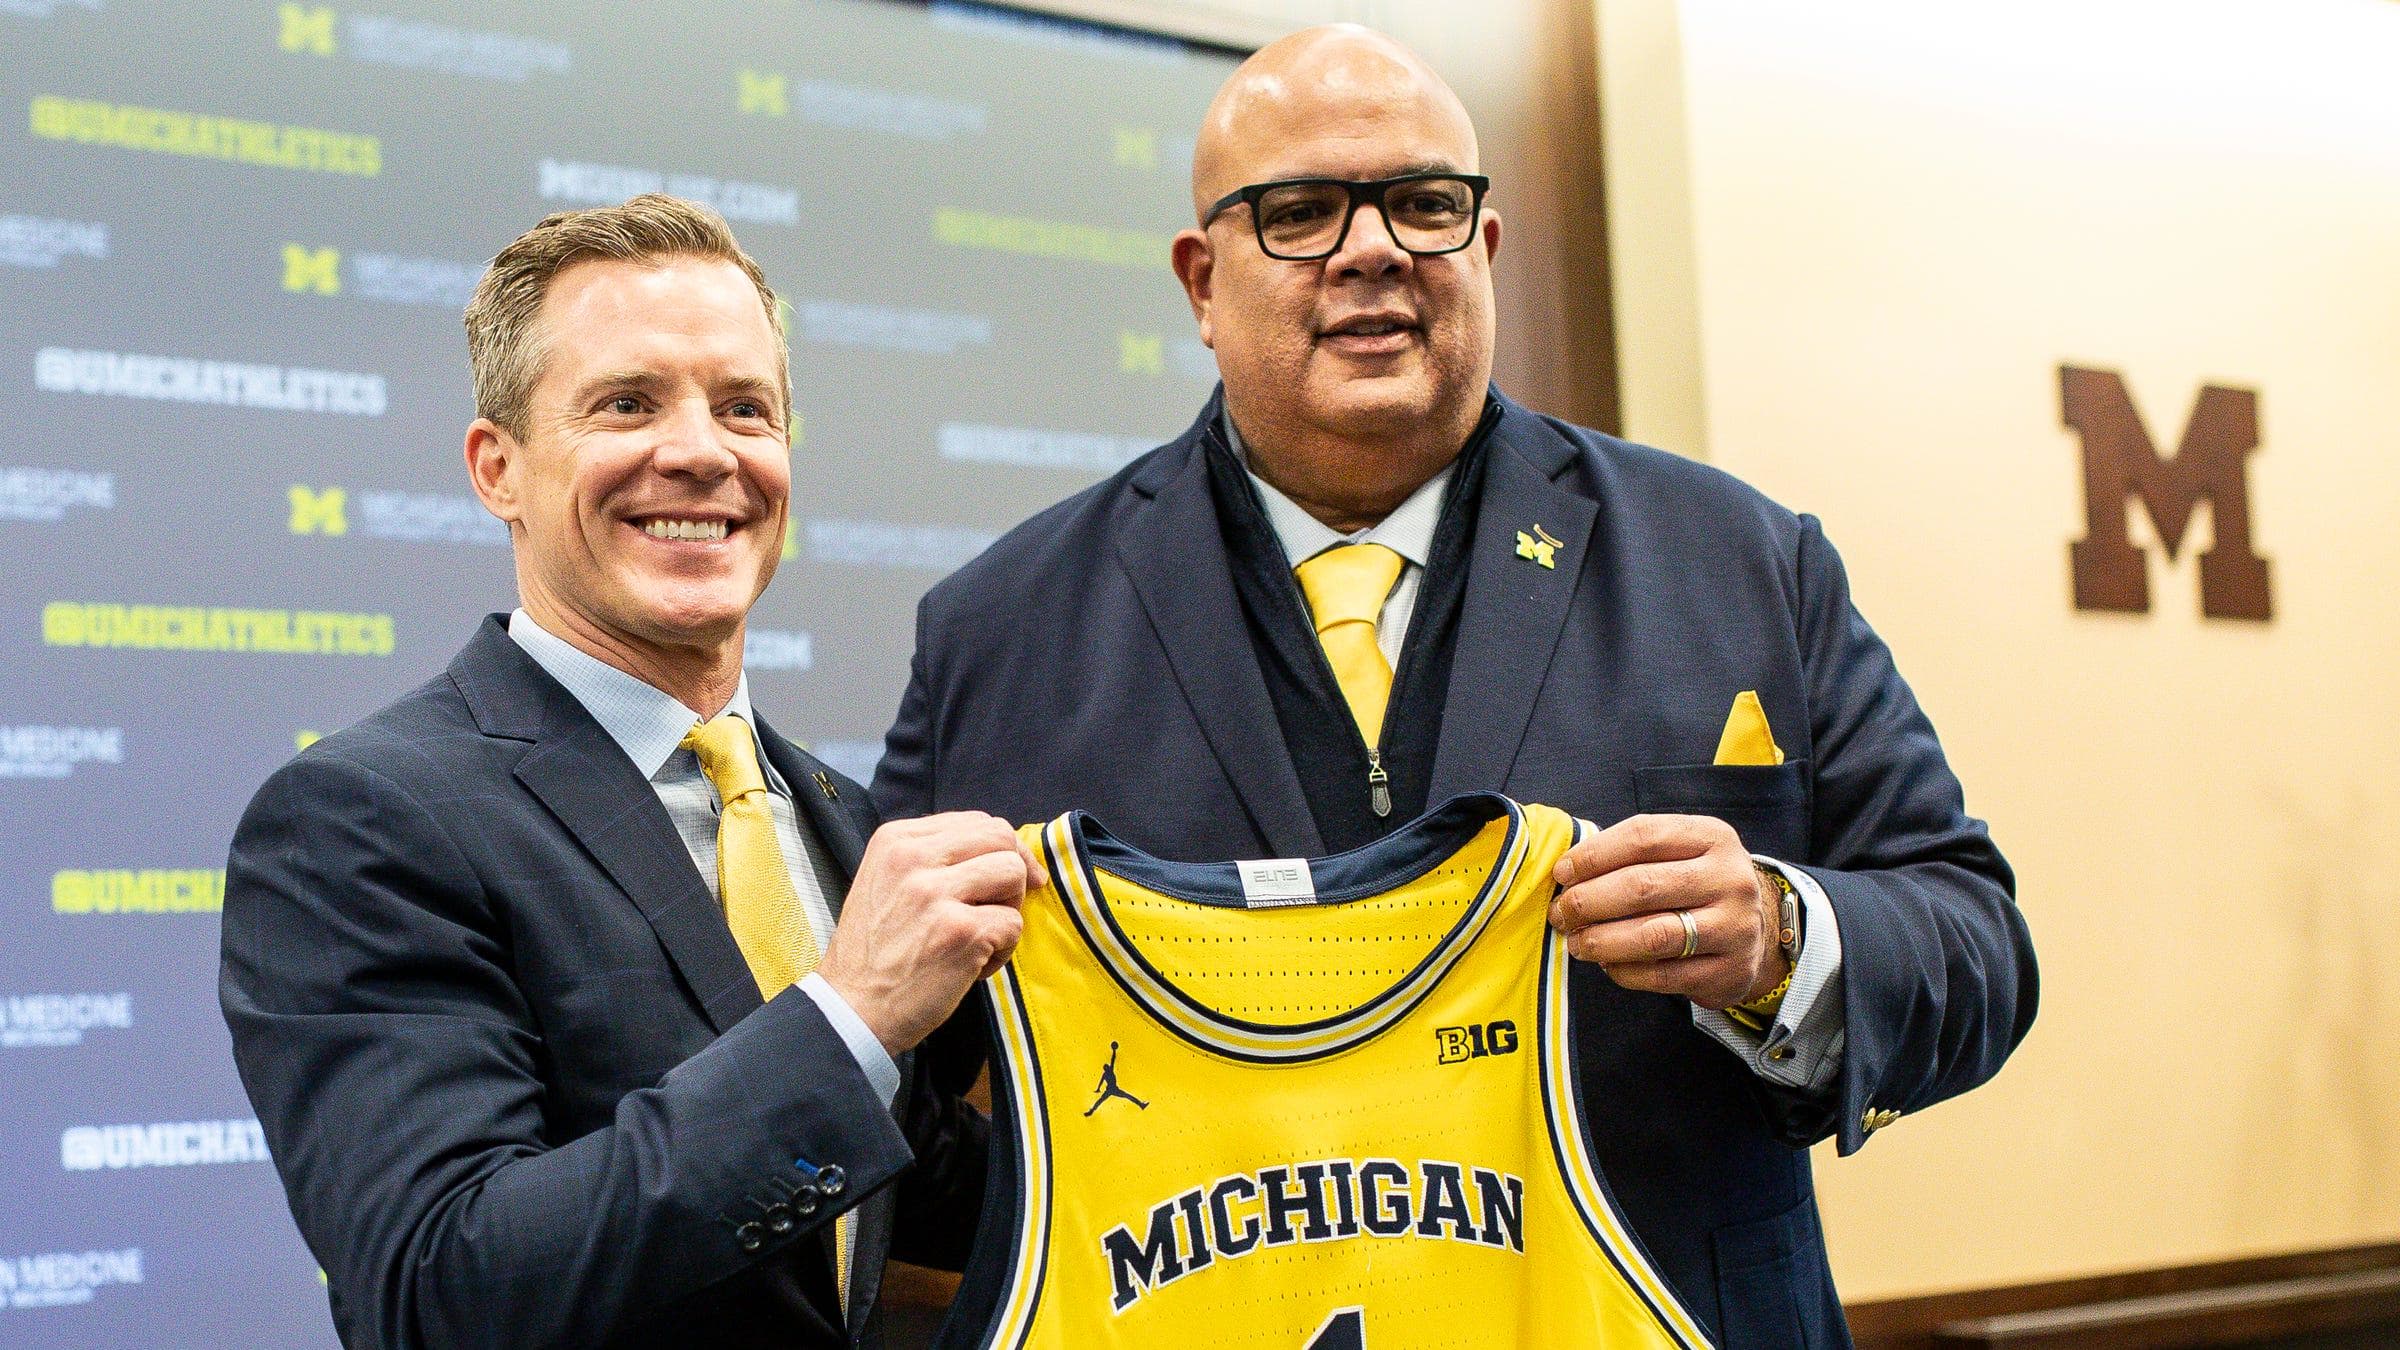 Michigan athletic director Warde Manuel presents a jersey to May during his introduction.